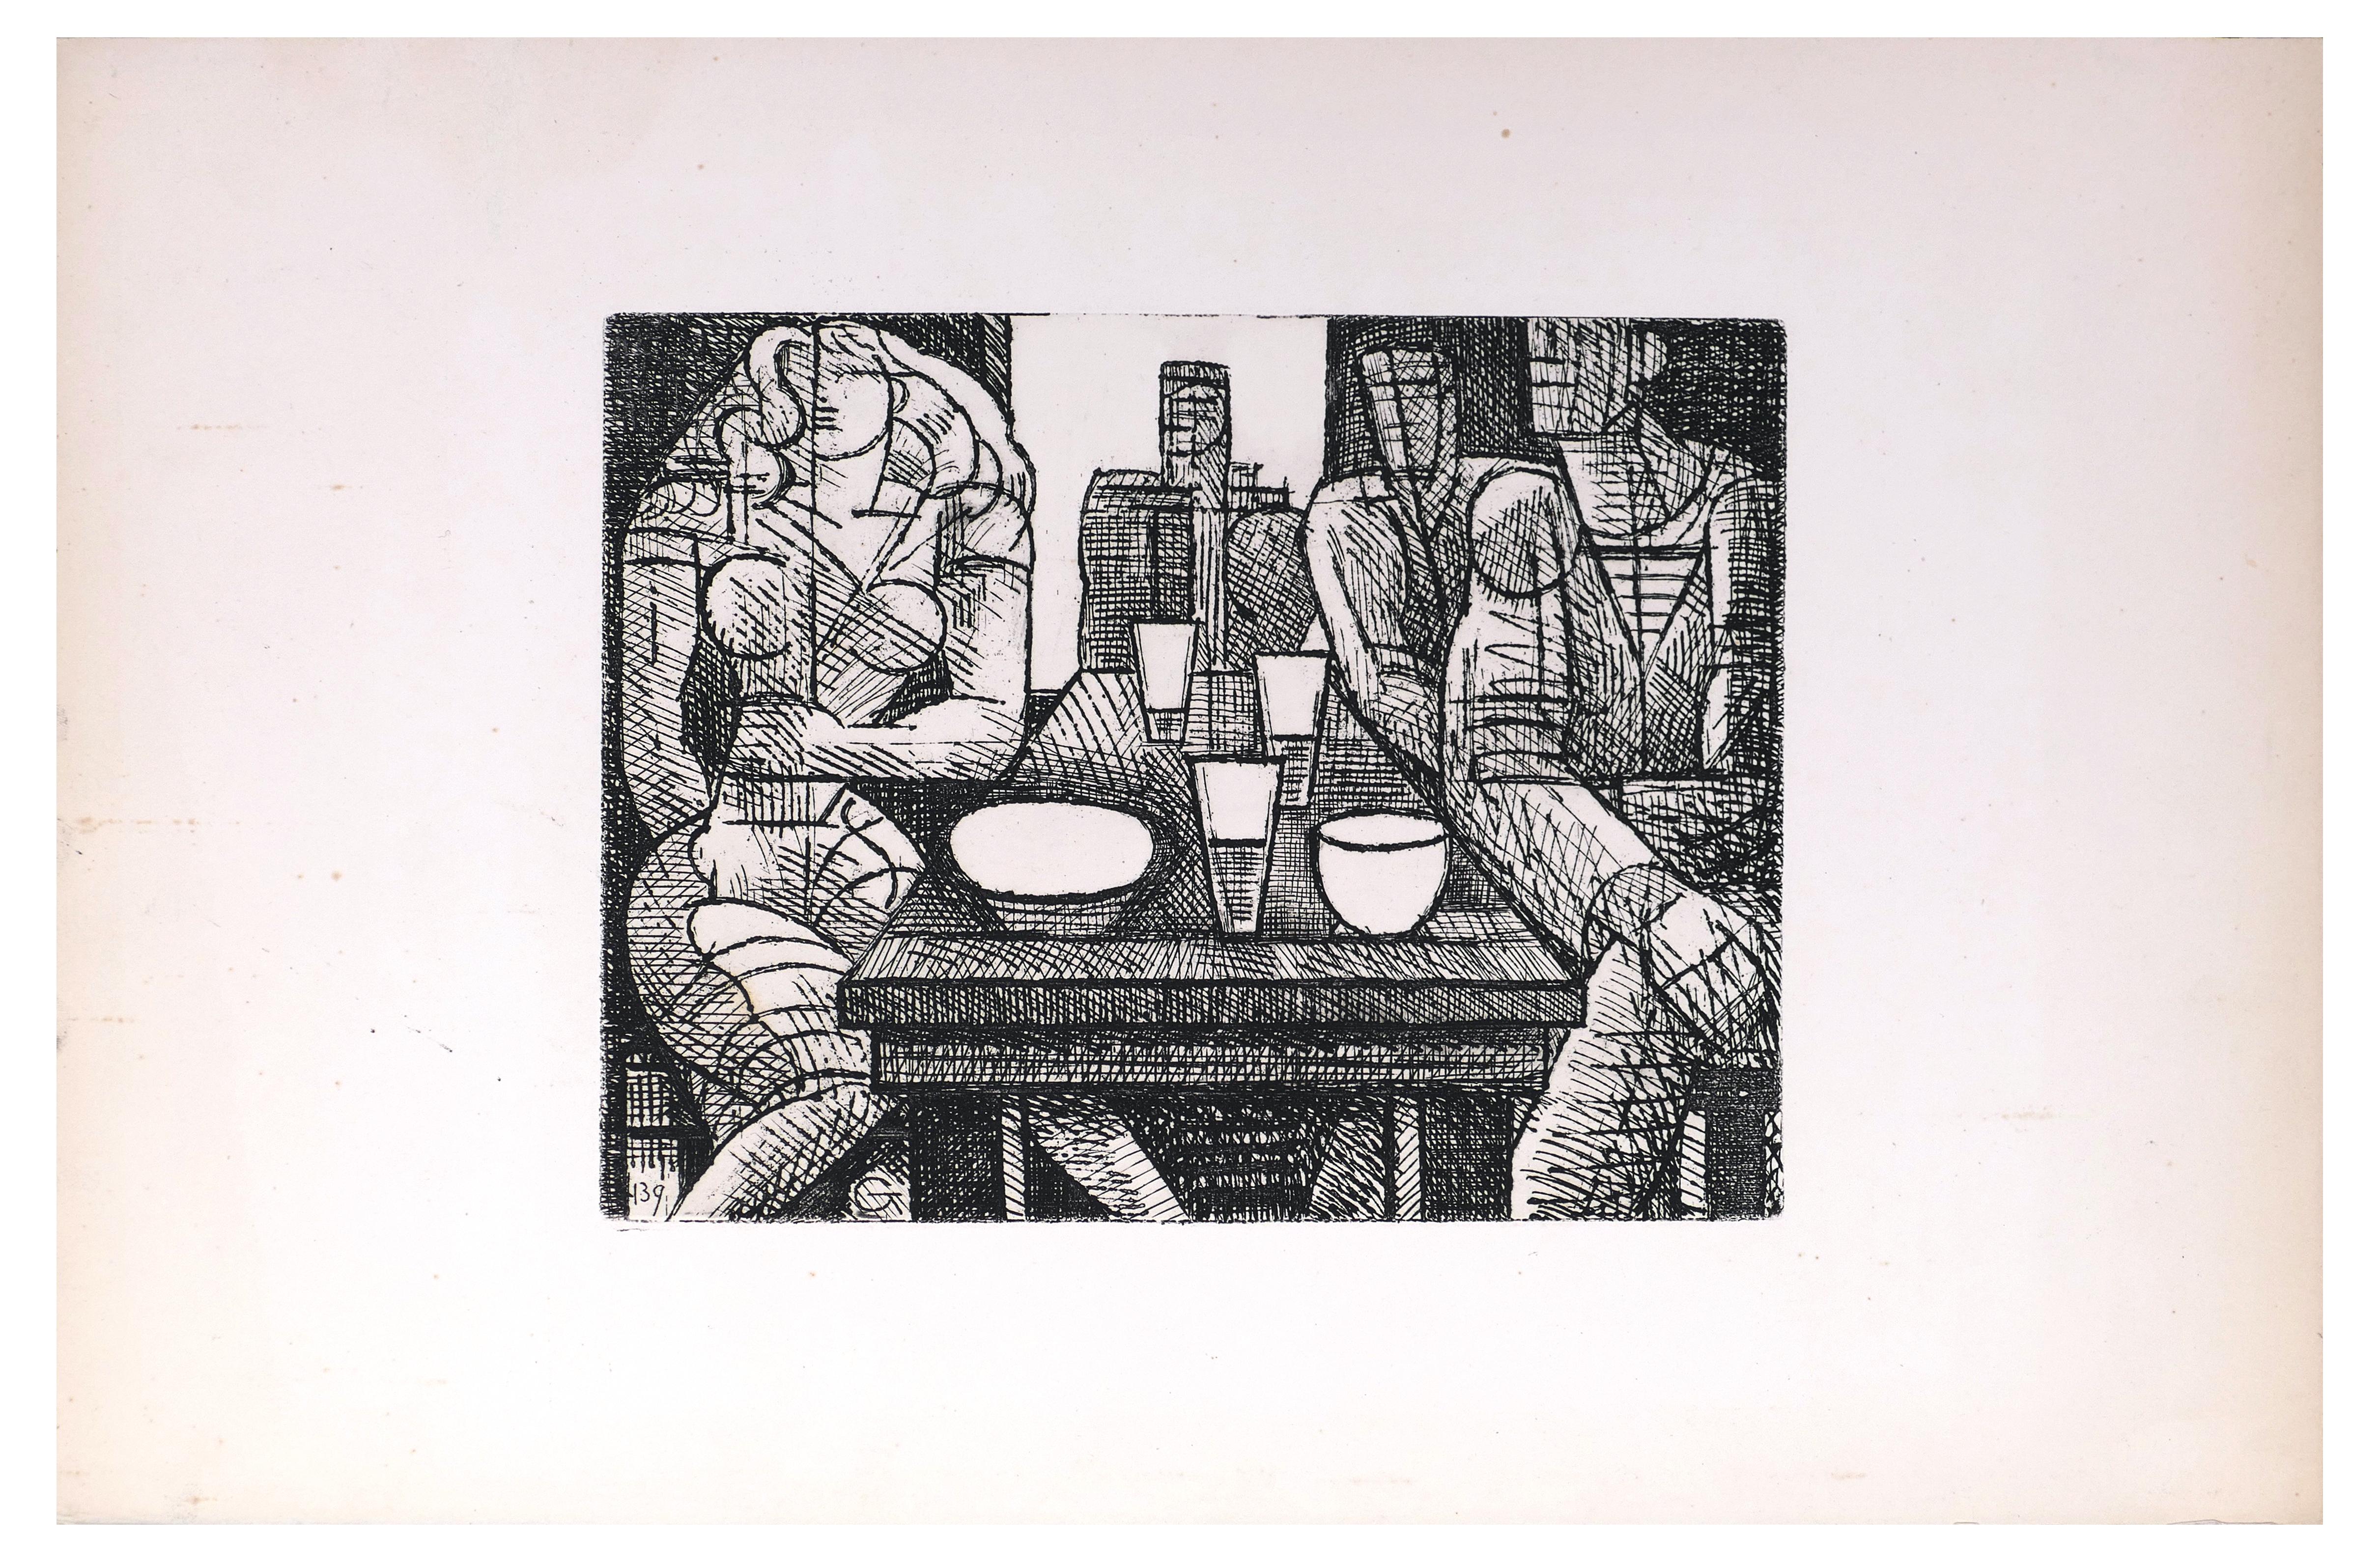 Tavern - Original Etching by Marcel Gromaire - 1952